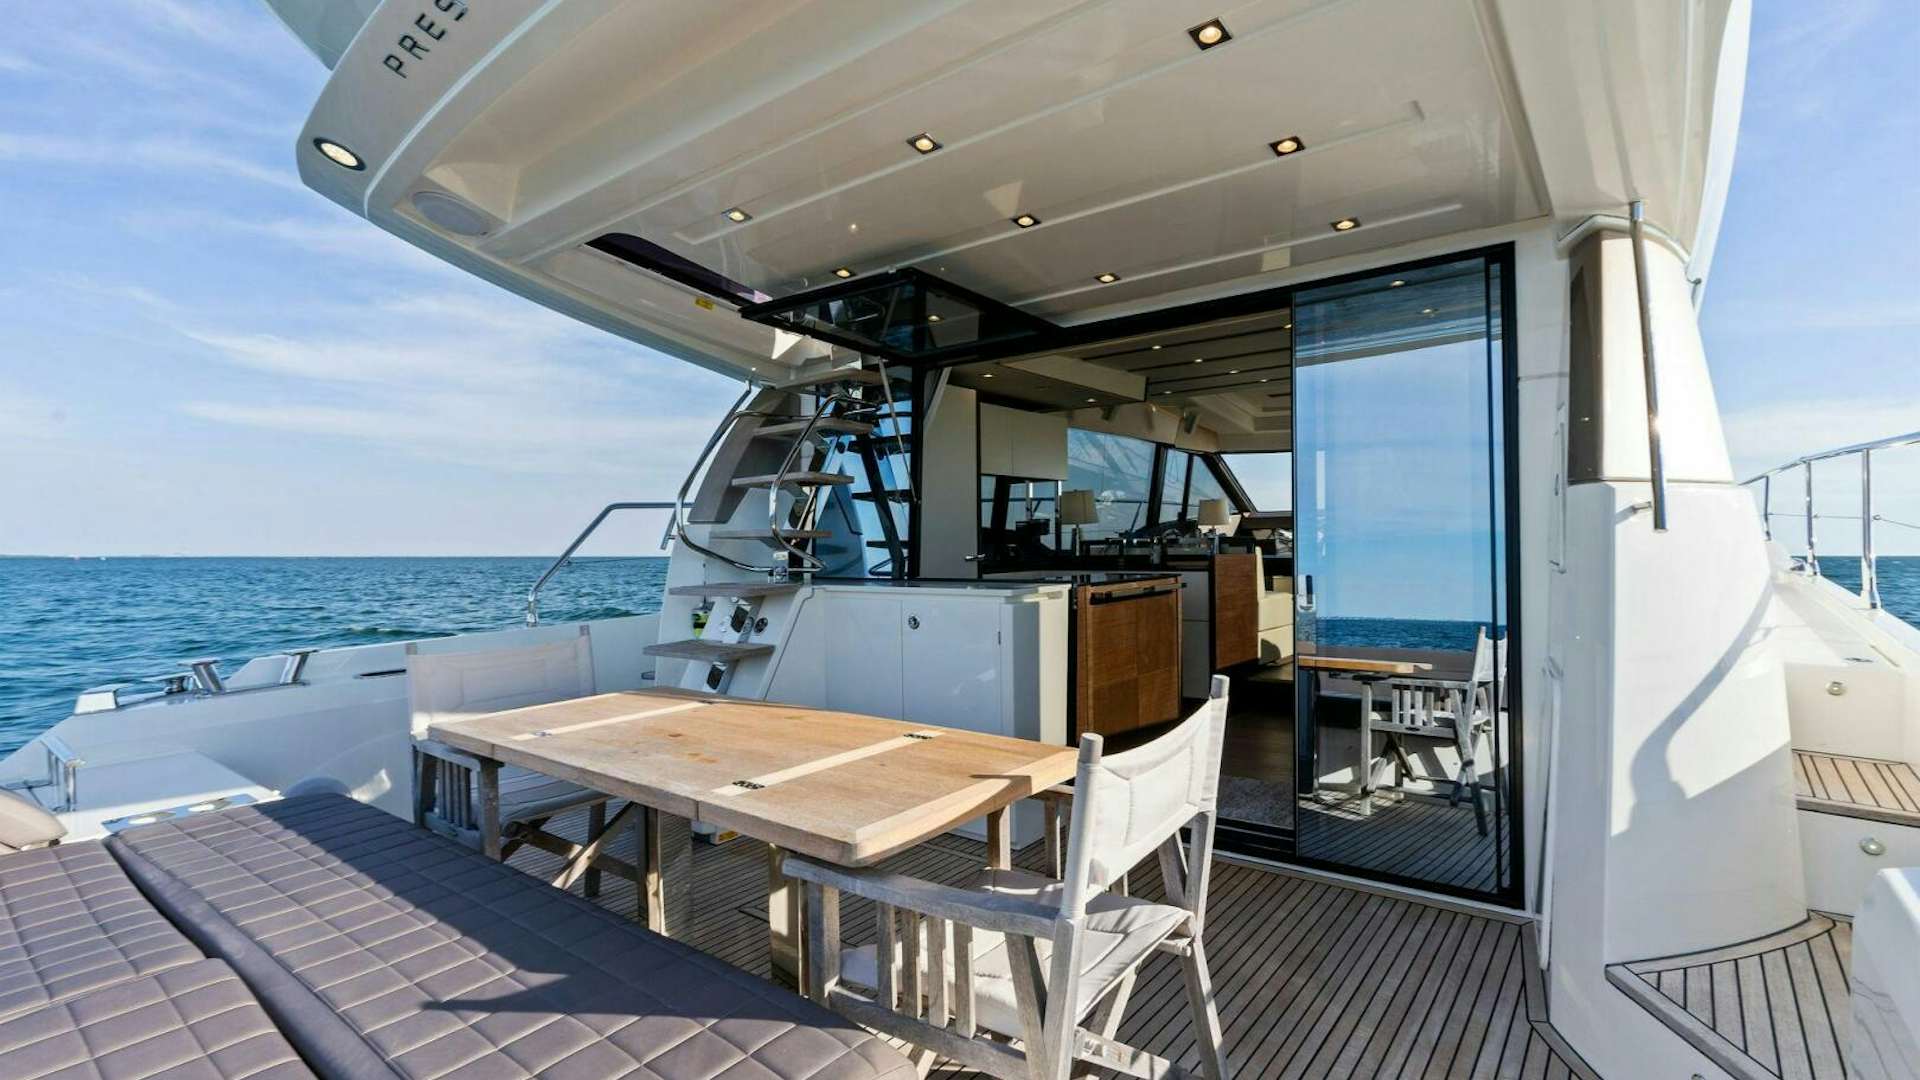 R t time
Yacht for Sale